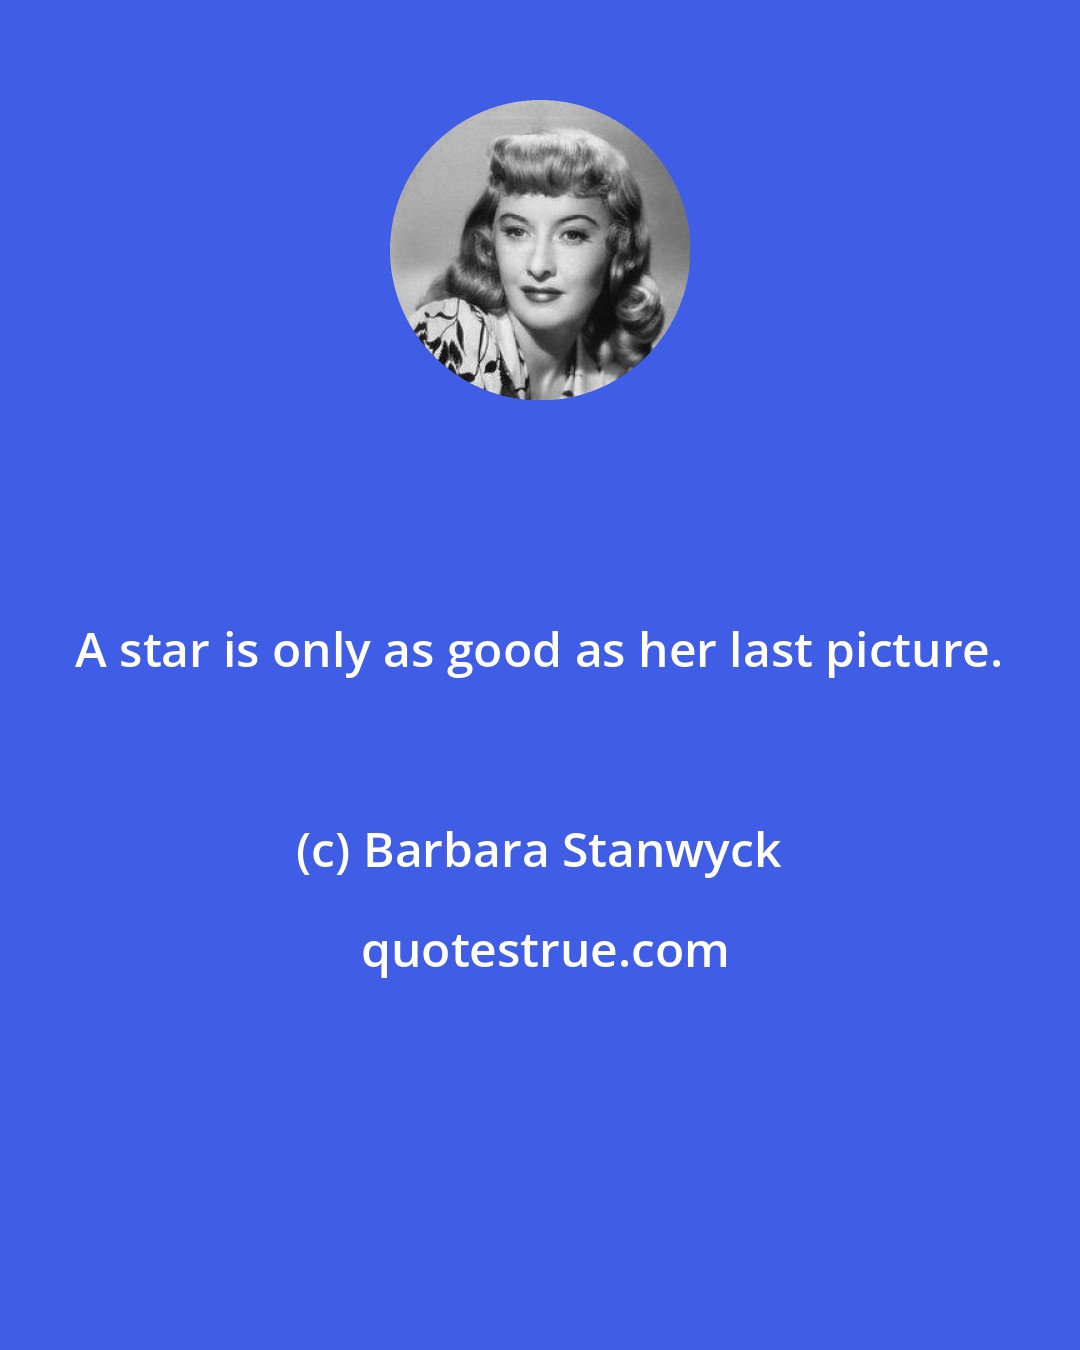 Barbara Stanwyck: A star is only as good as her last picture.